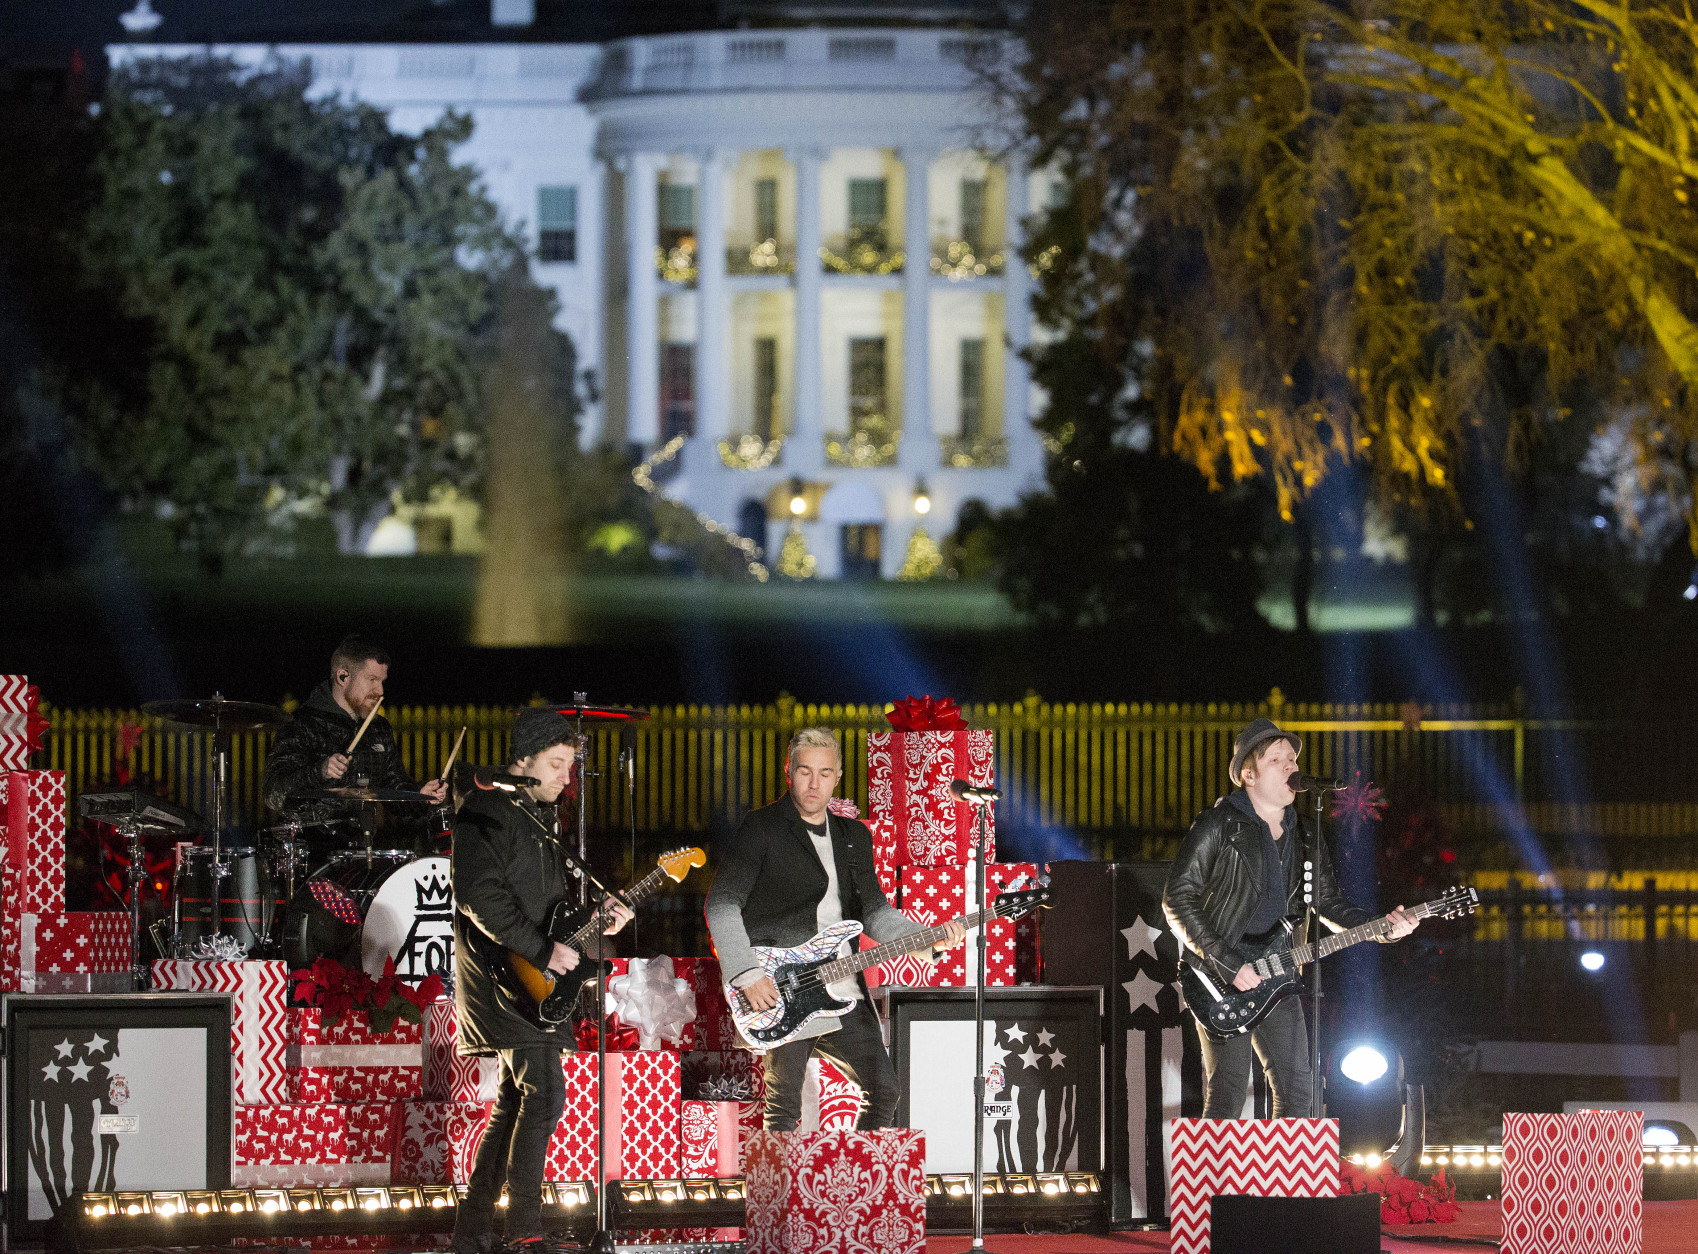 Members of the band Fall Out Boy perform on stage during the National Christmas Tree Lighting ceremony at the Ellipse in Washington, Thursday, Dec. 3, 2015. (AP Photo/Pablo Martinez Monsivais)